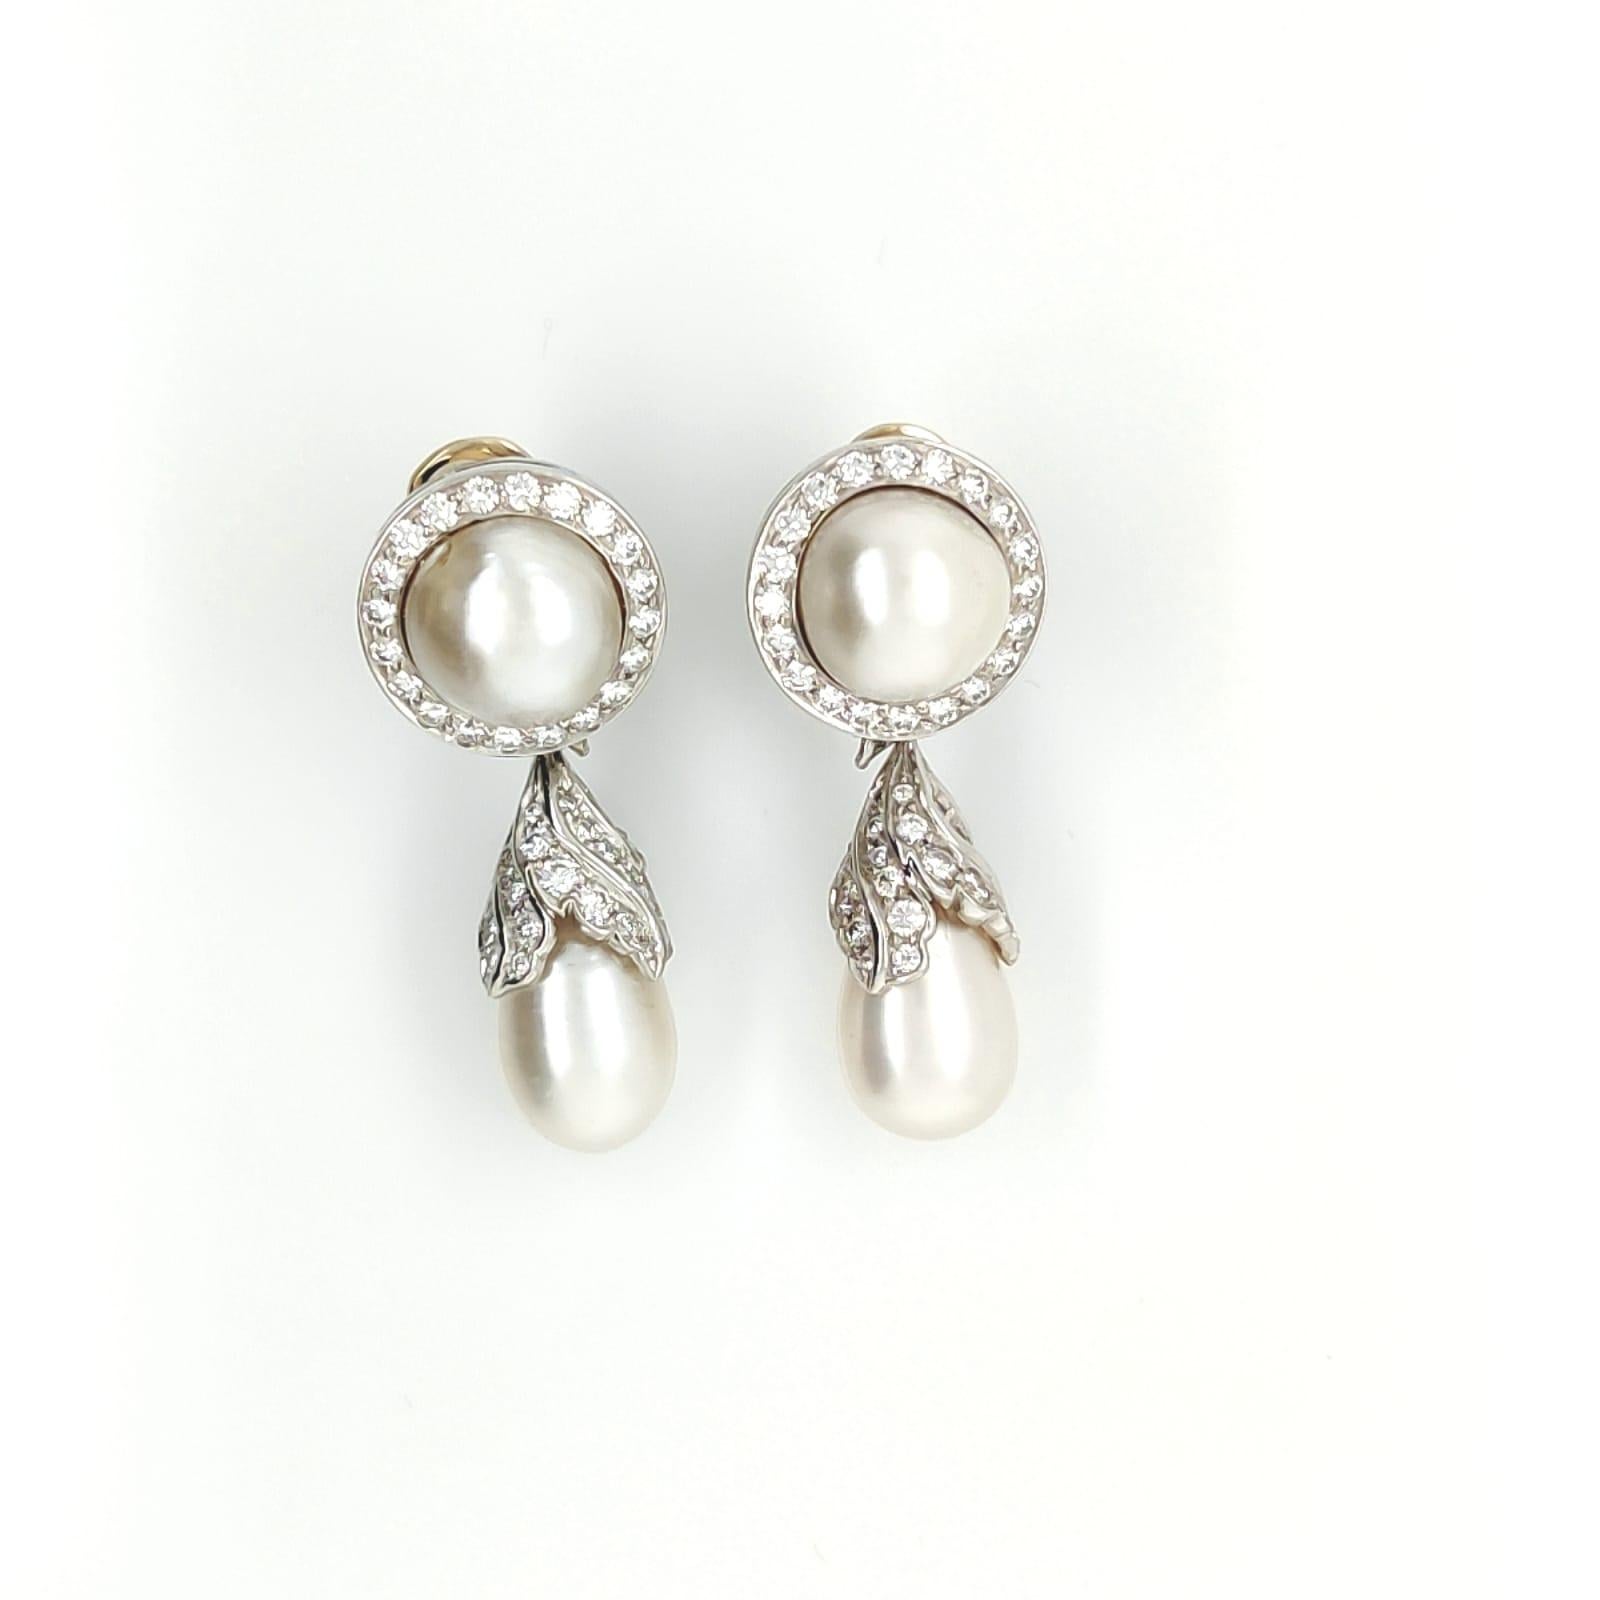 These Natural Pearl and Diamonds Drop Earrings in Platinum are a stunning piece of jewelry that exudes elegance and sophistication. The earrings feature natural pearls and diamonds set in platinum, a precious metal that adds to the luxuriousness of